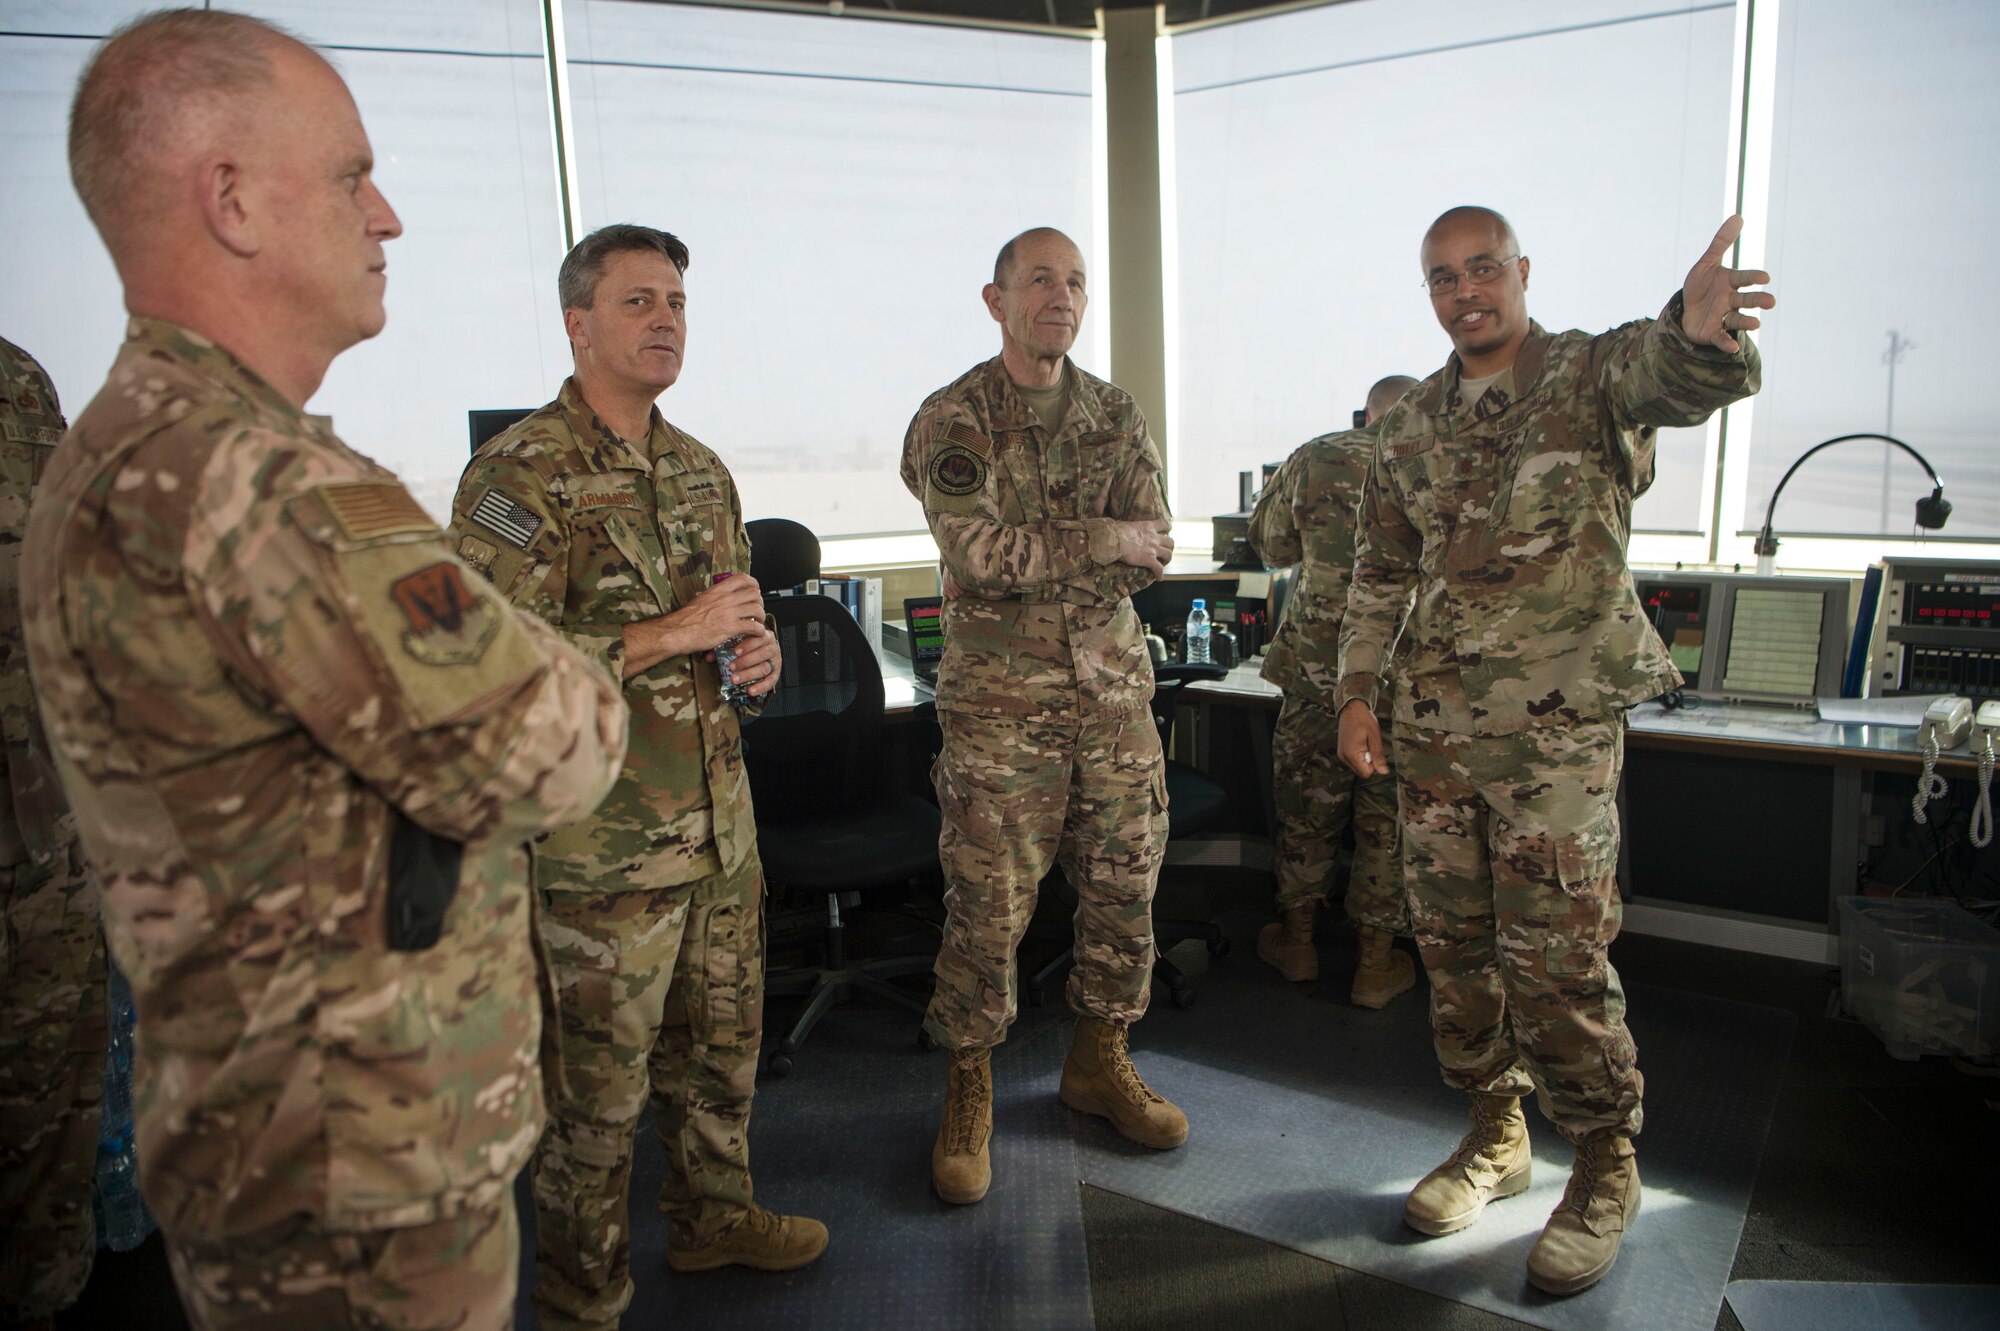 Gen. Mike Holmes, commander of Air Combat Command, Brig. Gen Jason Armagost, 379th Air Expeditionary Wing commander (center left), and Chief Master Sgt. Frank Batten, ACC command chief (left), listen to a control tower mission briefing from Maj. Donald Roley, 379th Expeditionary Operations Support Squadron, during an ACC leadership visit Feb. 11, 2019, at Al Udeid Air Base, Qatar.